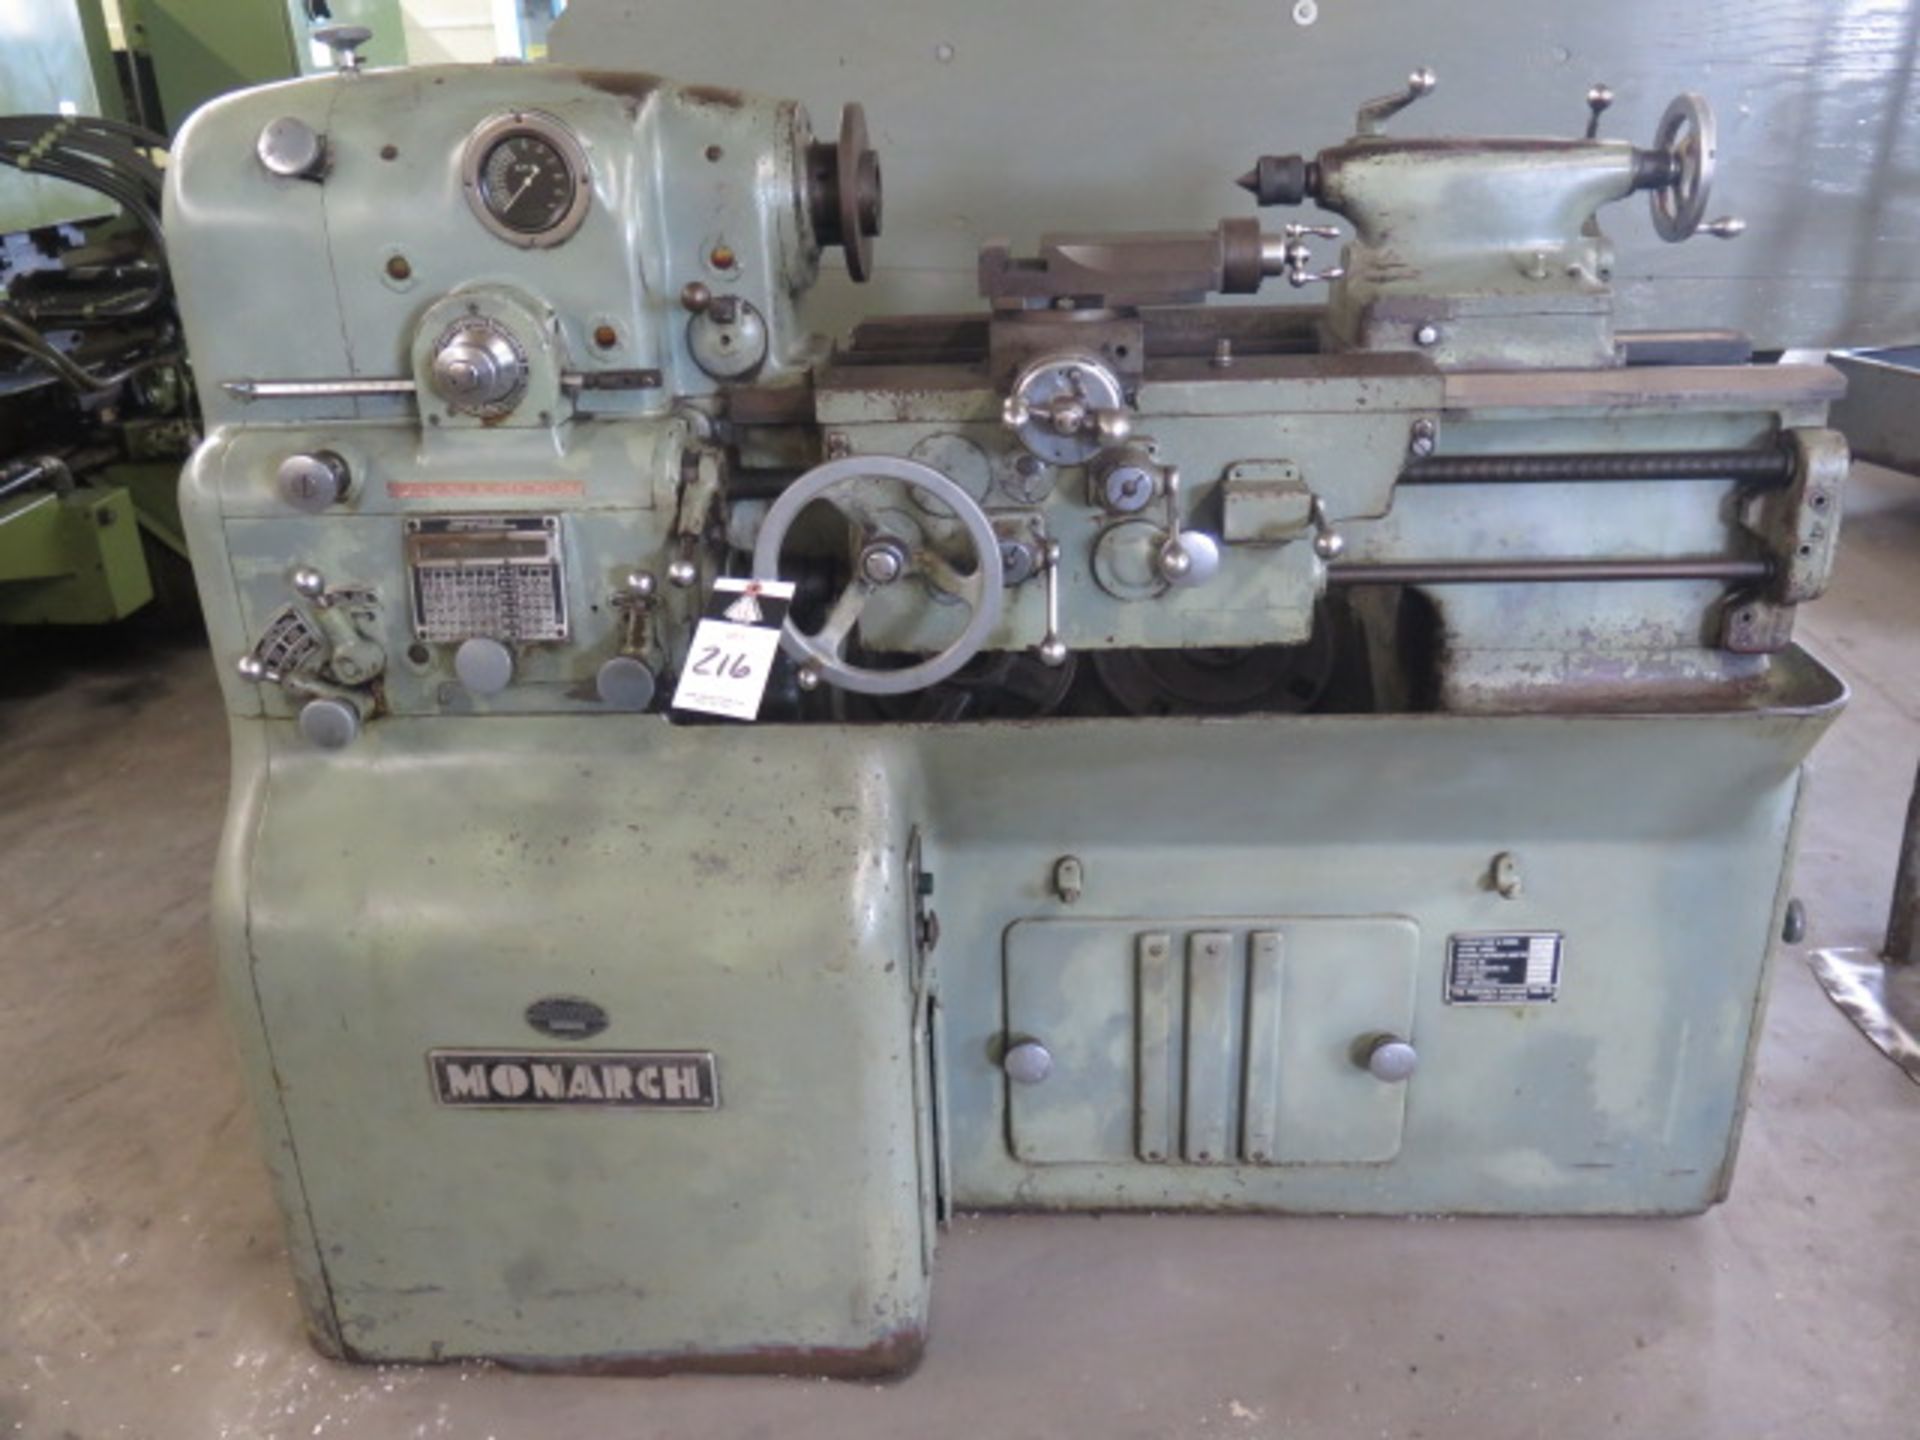 Monarch mdl. 10EE 12 ½” x 20” Tool Room Lathe s/n 28905 w/ 2500 Max RPM, Dial RPM Gage, Inch